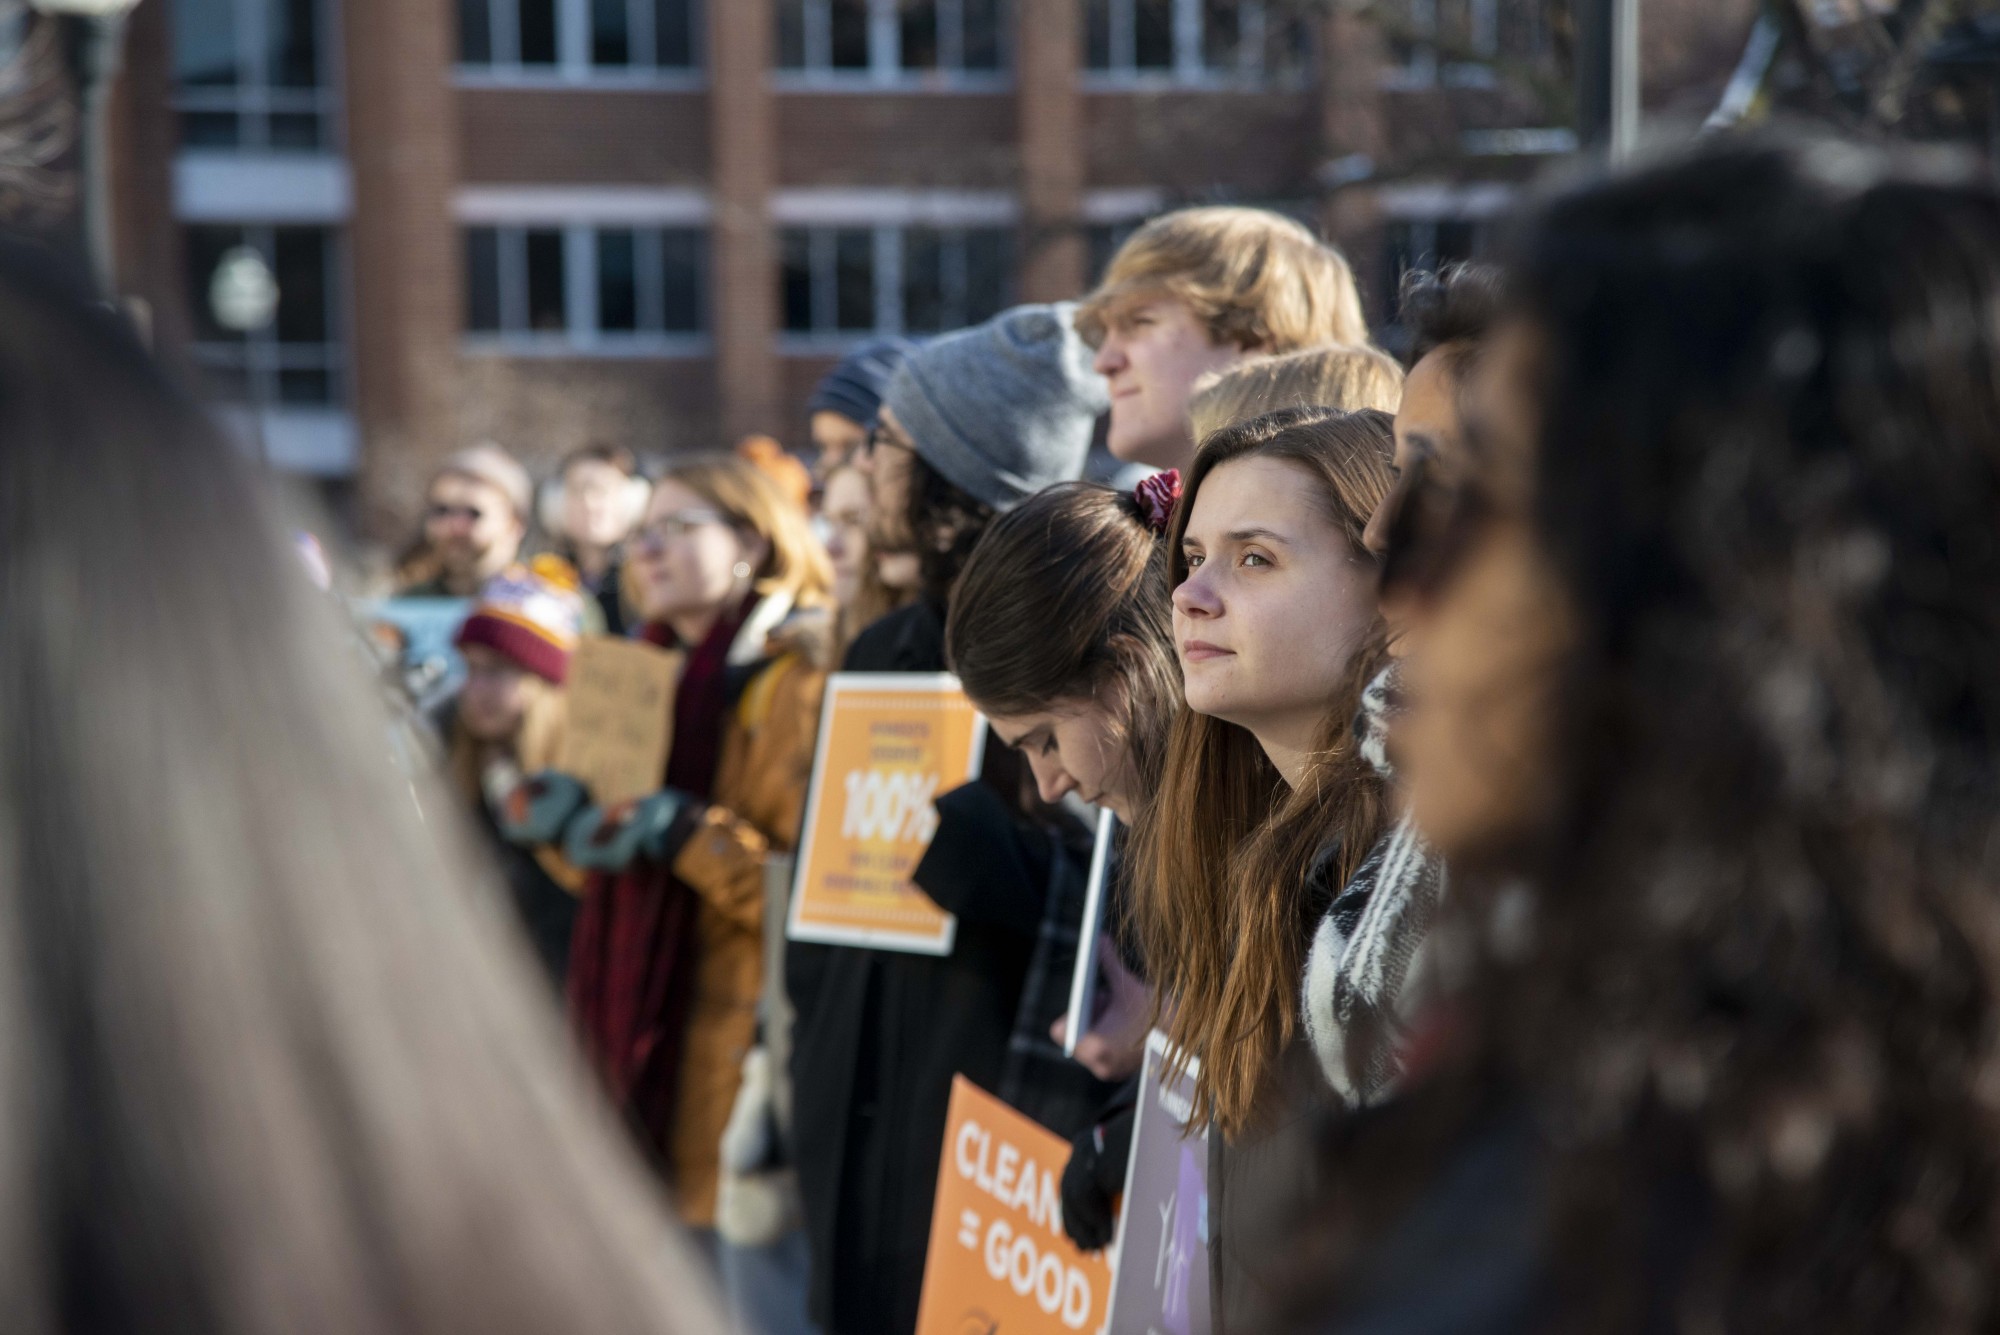 Students and faculty gather outside of Coffman Union to participate in the UMN Climate Strike on Friday, Dec. 6. Those in attendance criticized the University’s policies on fossil fuel usage.